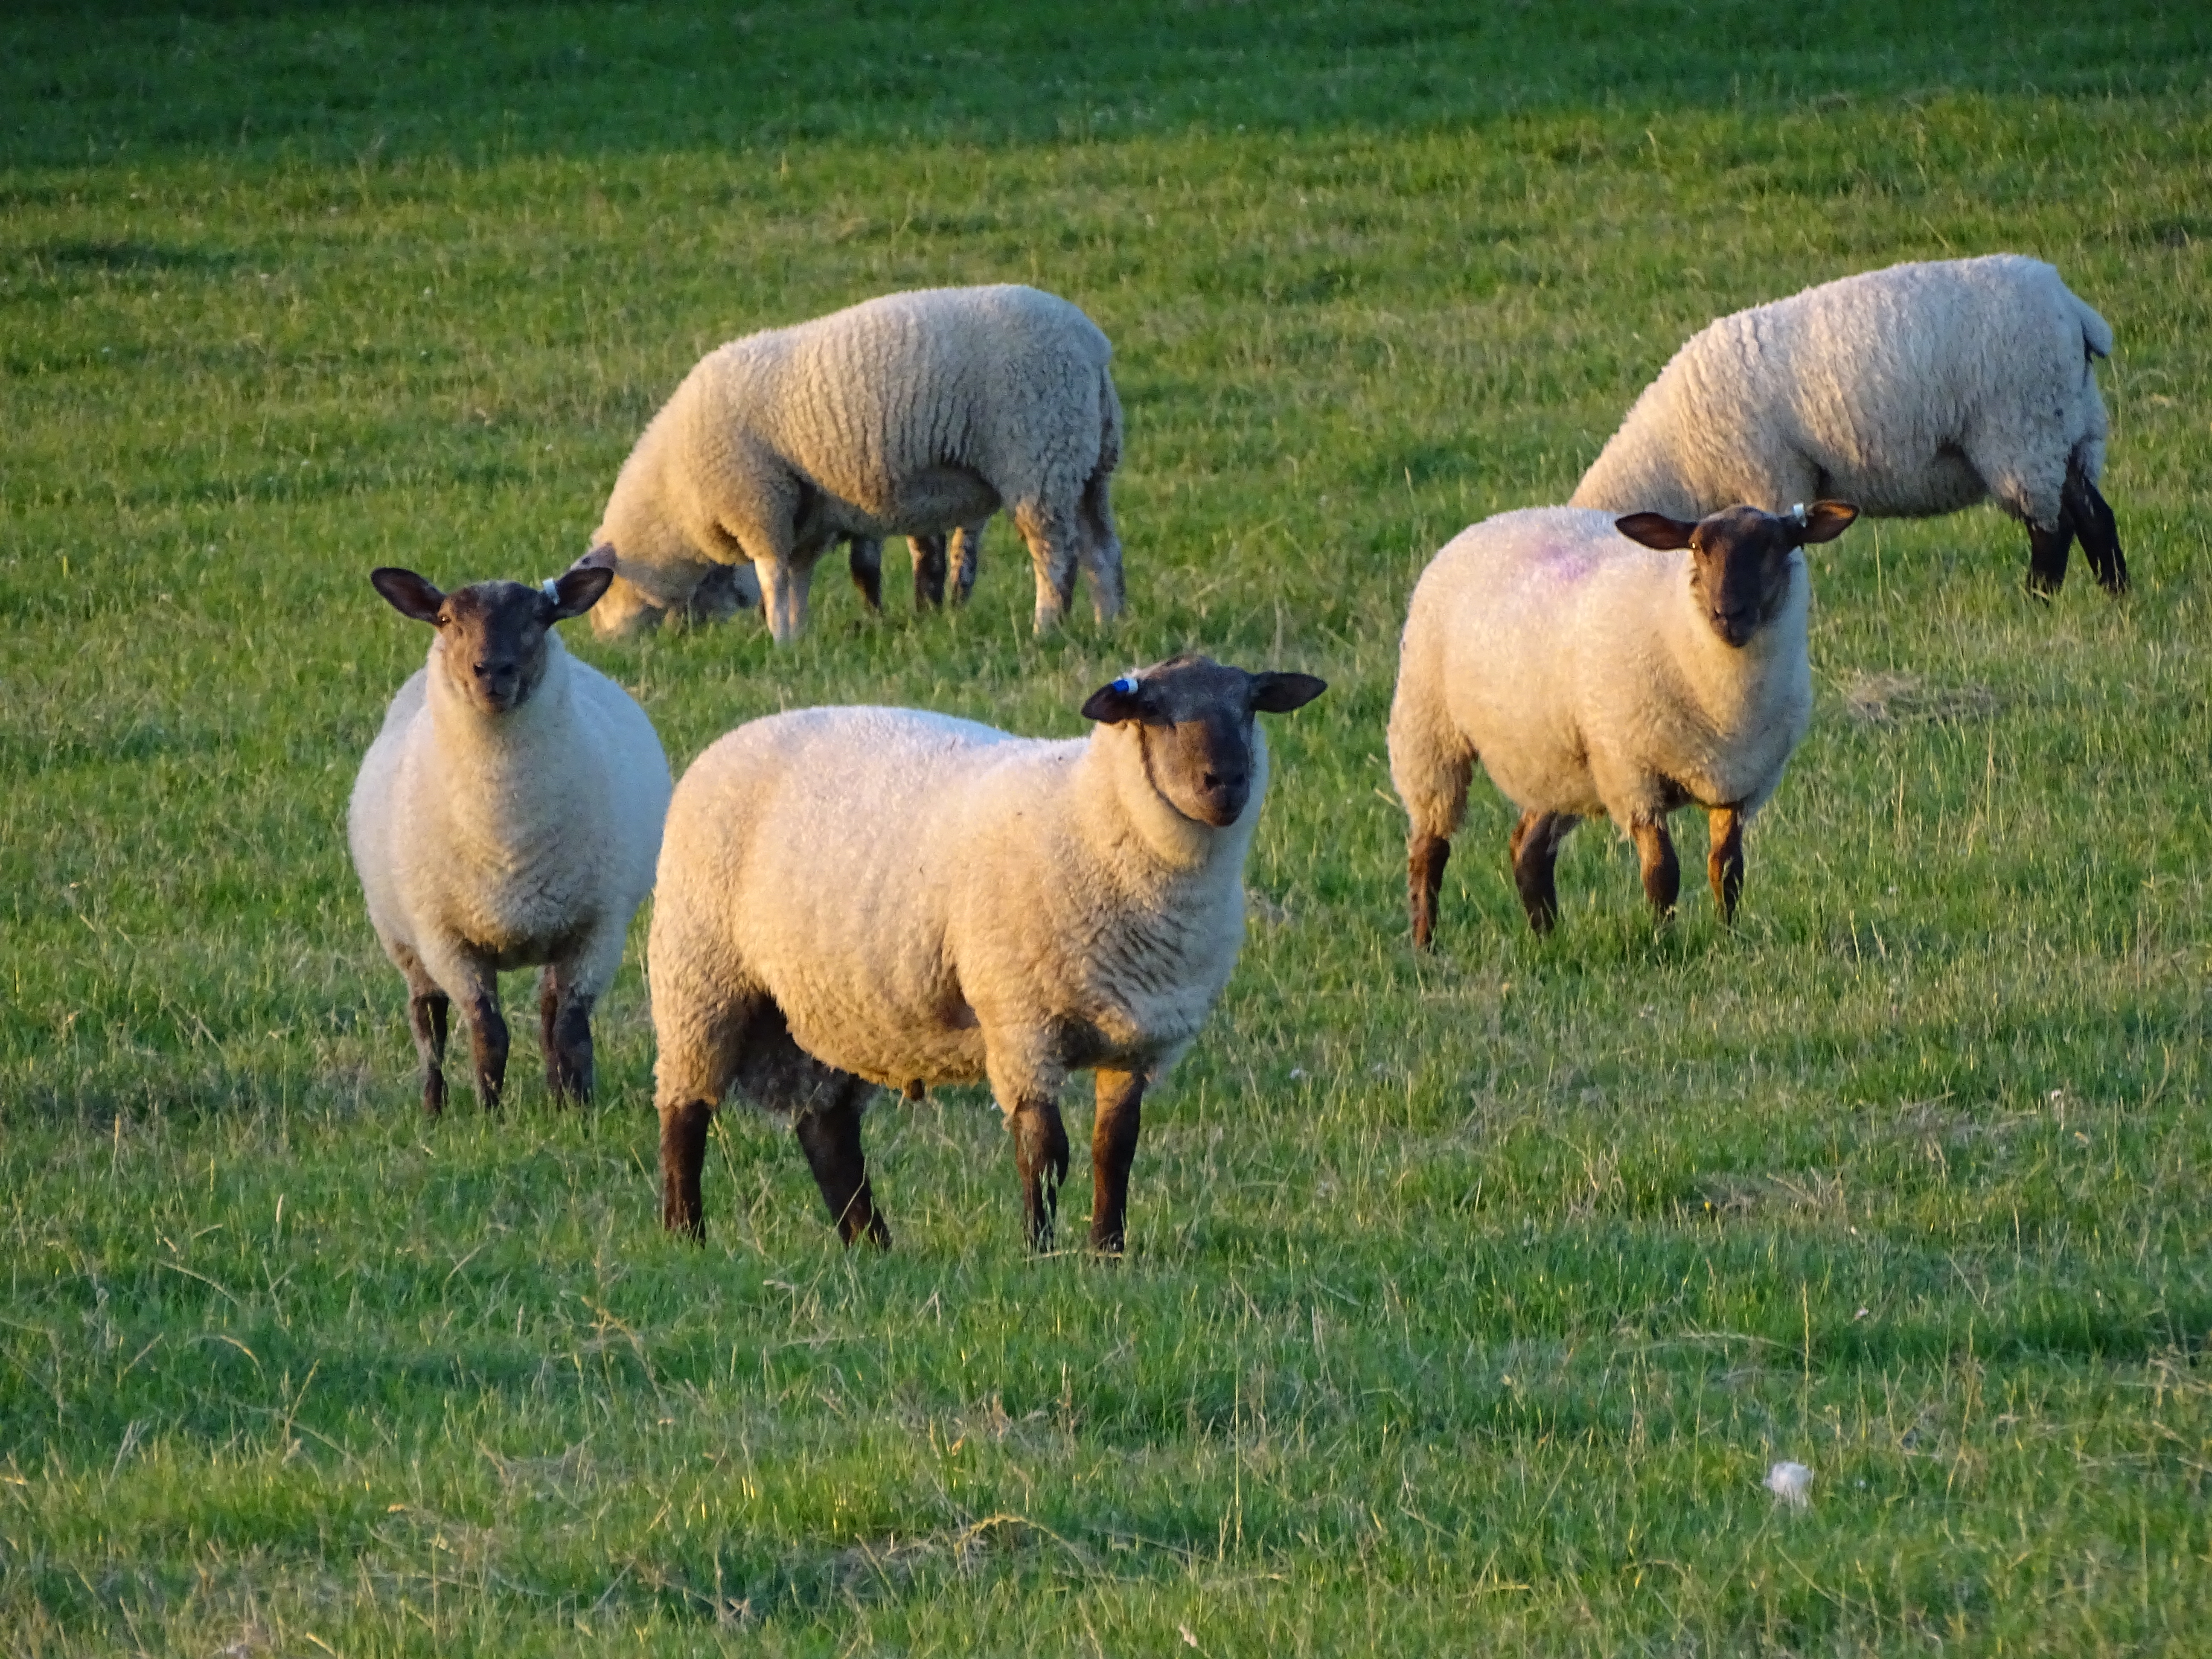 Three P's to remember for your flock